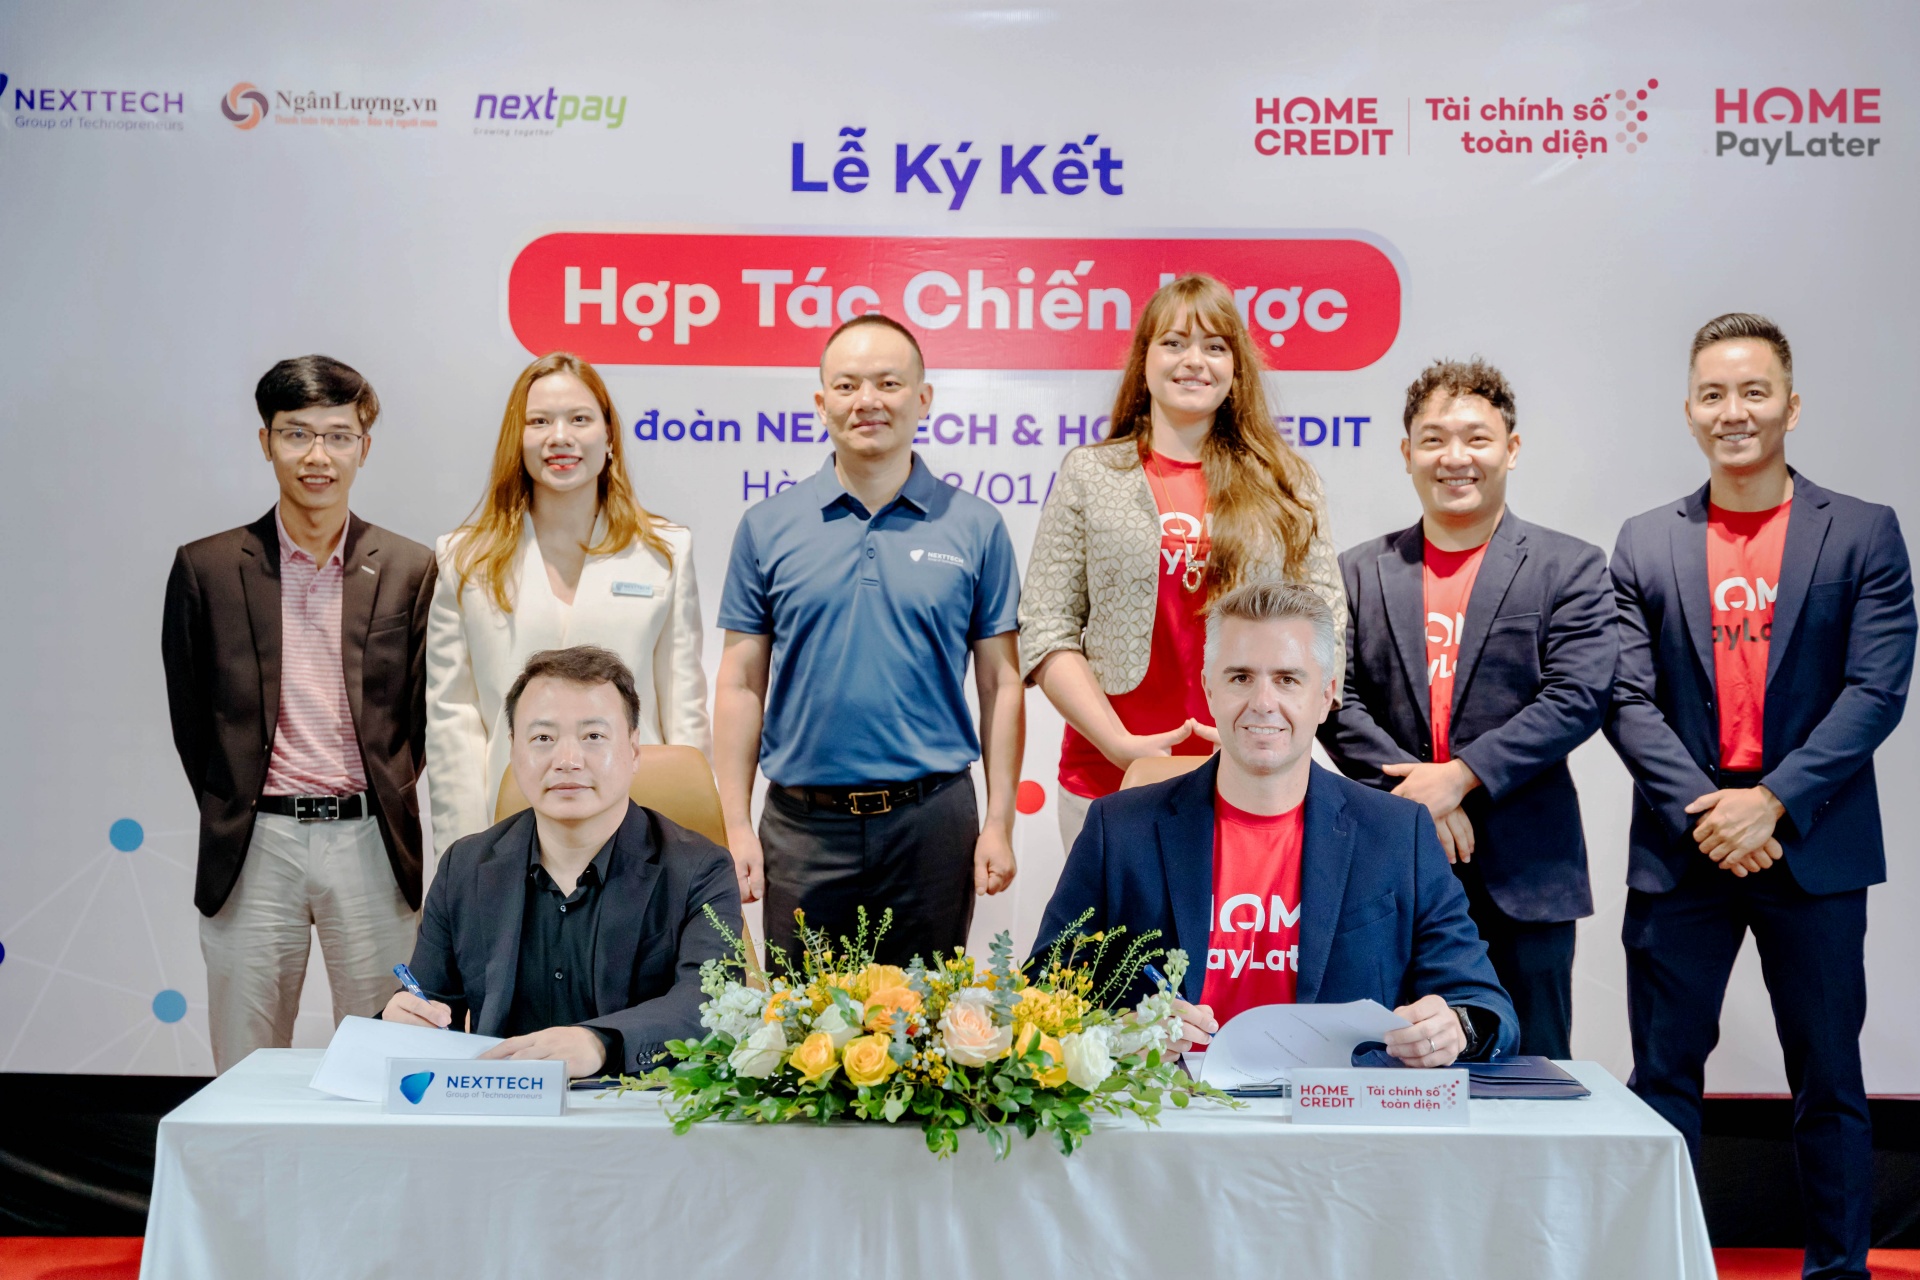 Home Credit and NextTech sign agreement on ‘Buy Now, Pay Later’ project